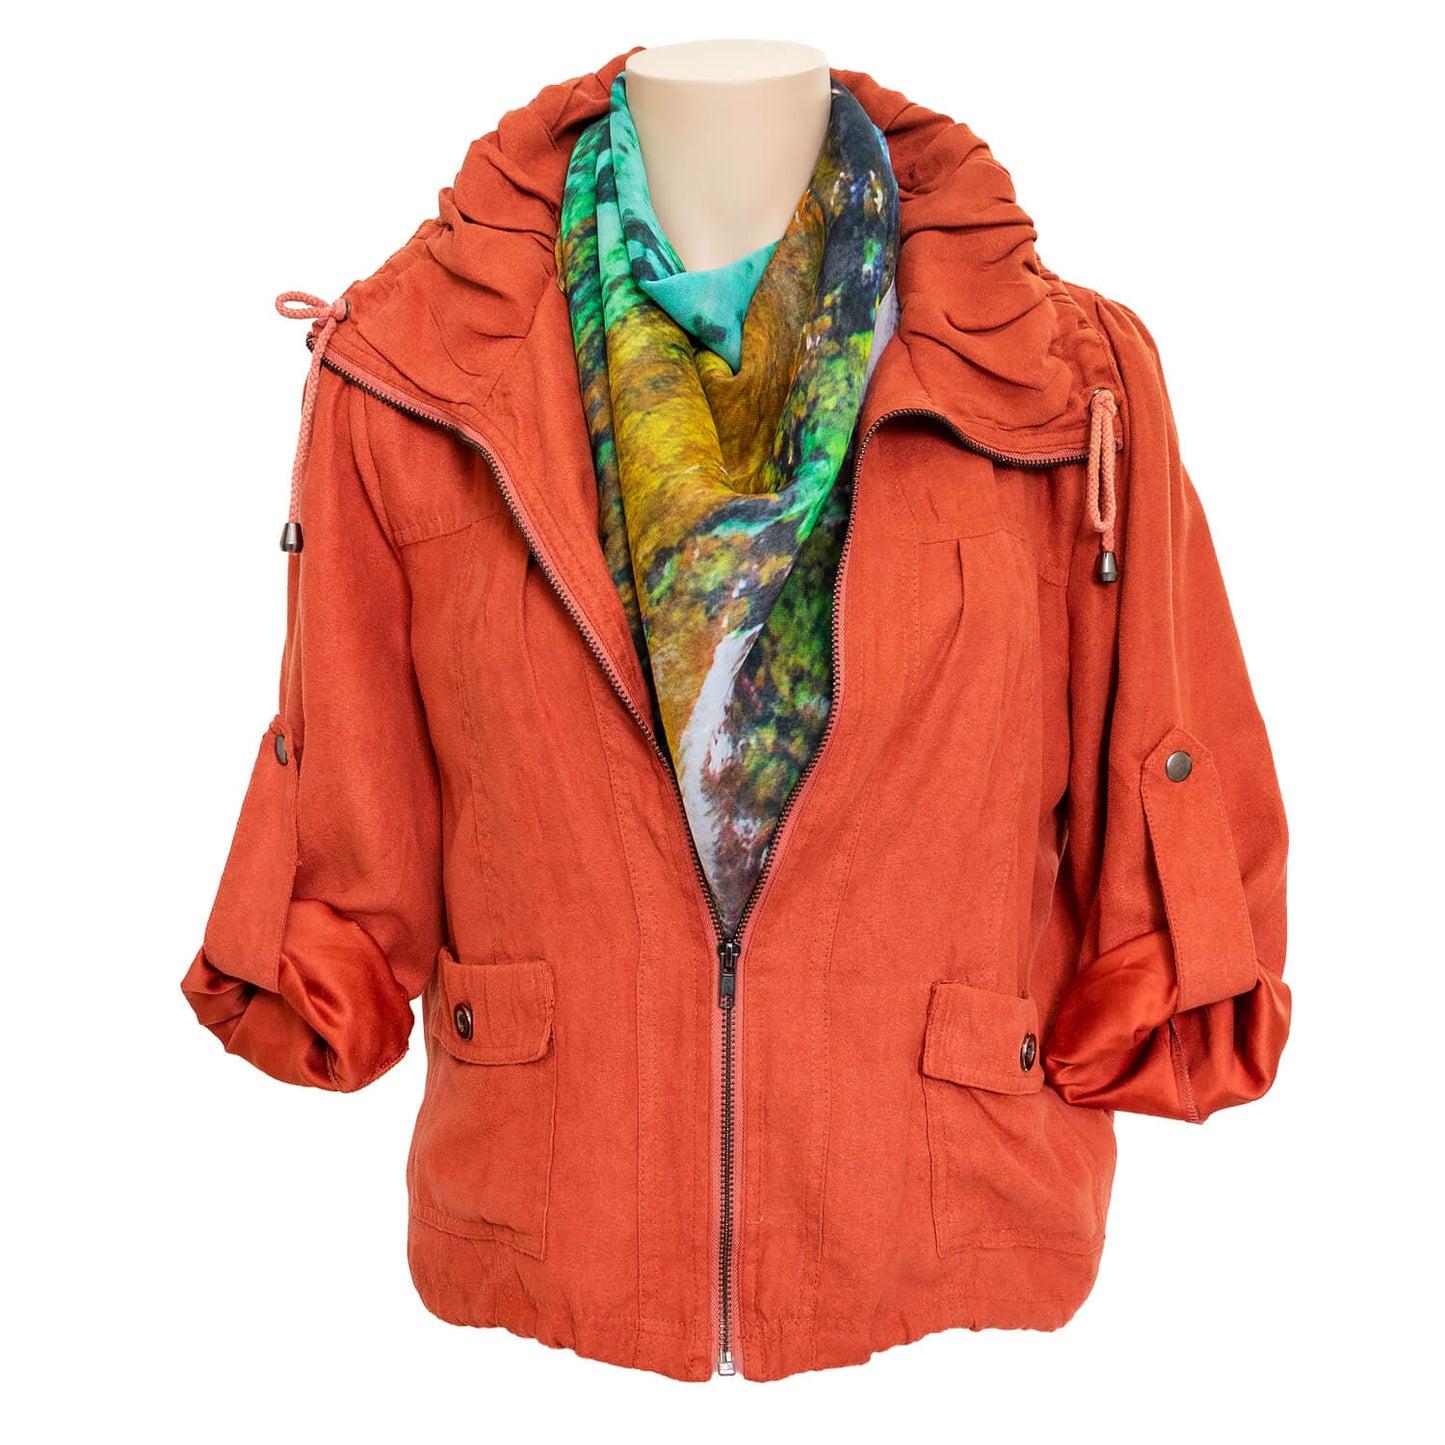 rotto reef wearable art silk scarf with terracotta jacket